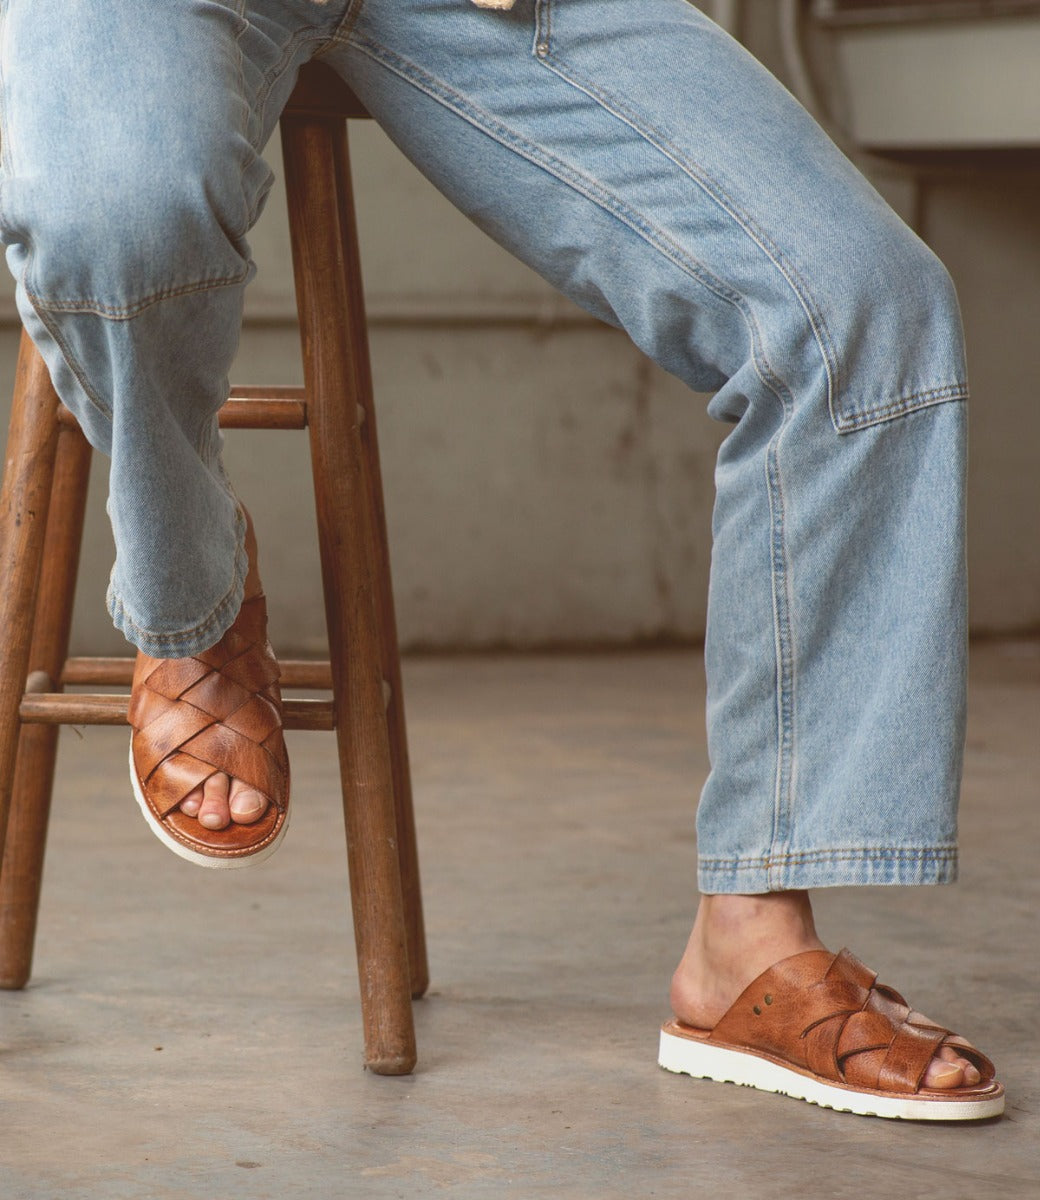 A person wearing blue jeans and Bed Stu Abraham Light leather sandals sits casually on a wooden stool.